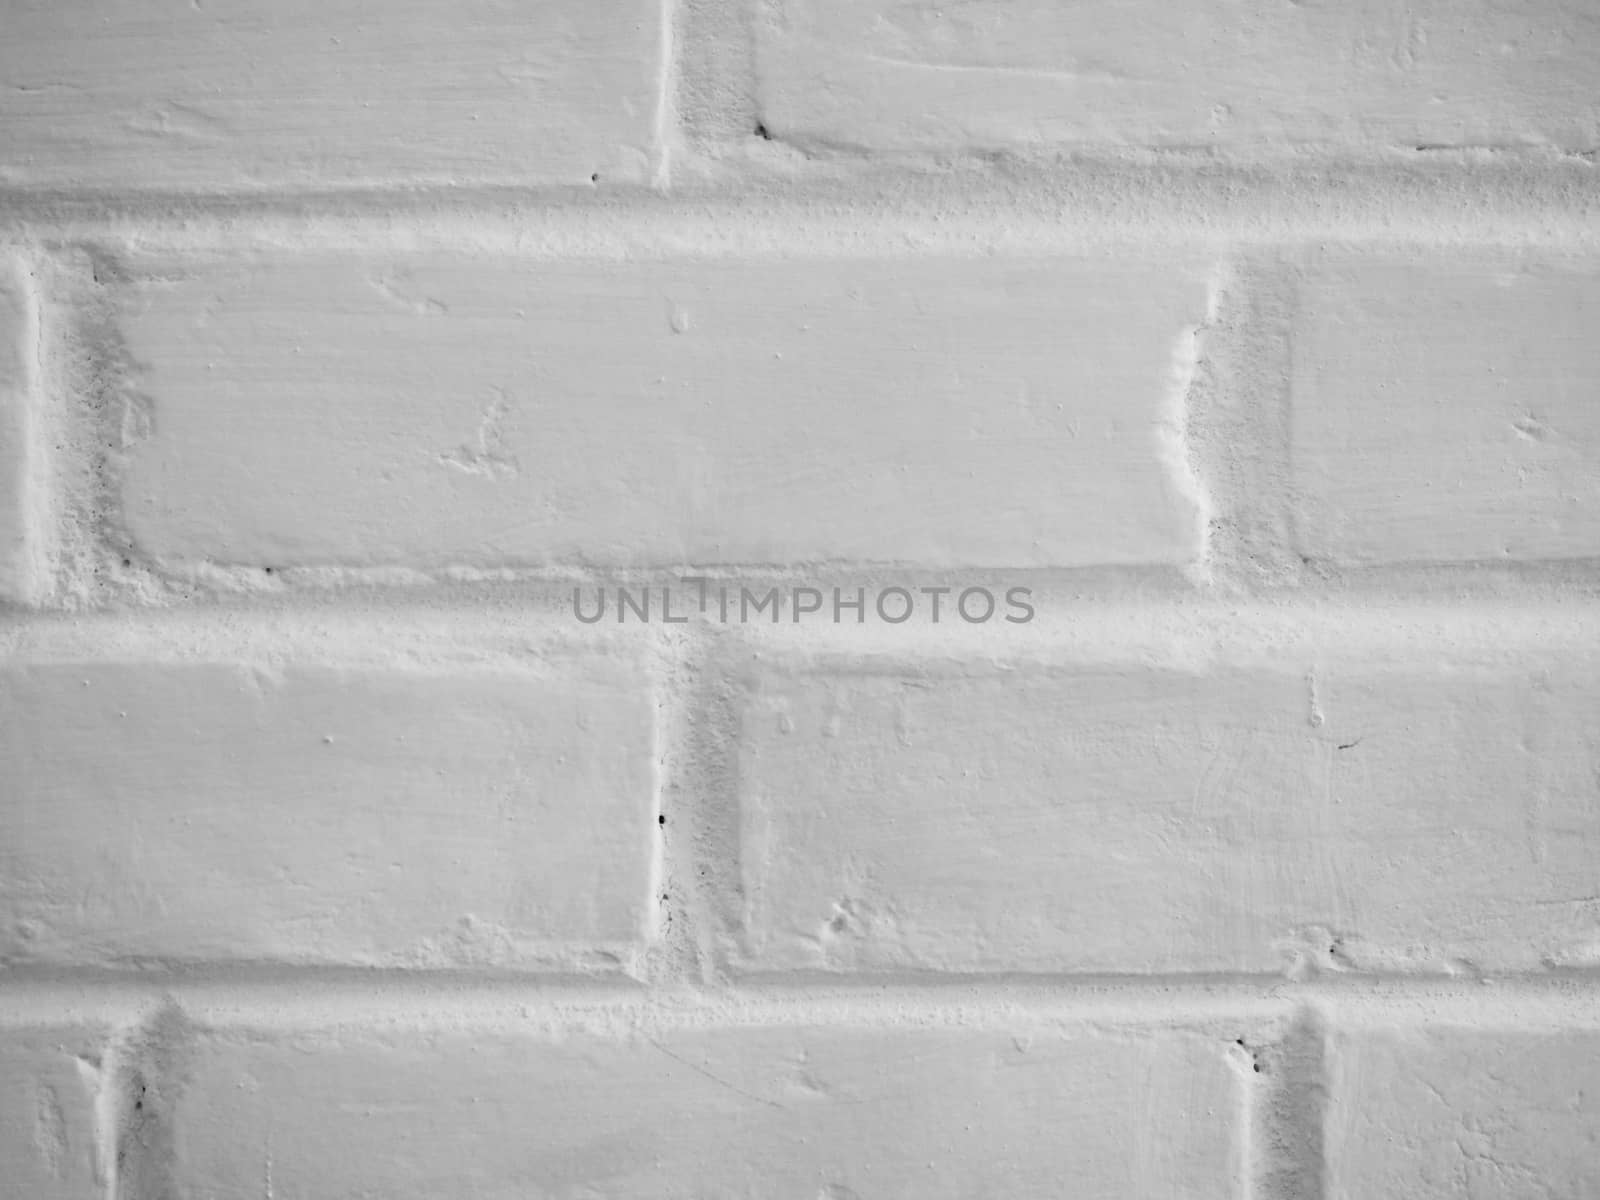 PLAIN WHITE BRICK WALL BACKGROUND TEXTURE by PrettyTG